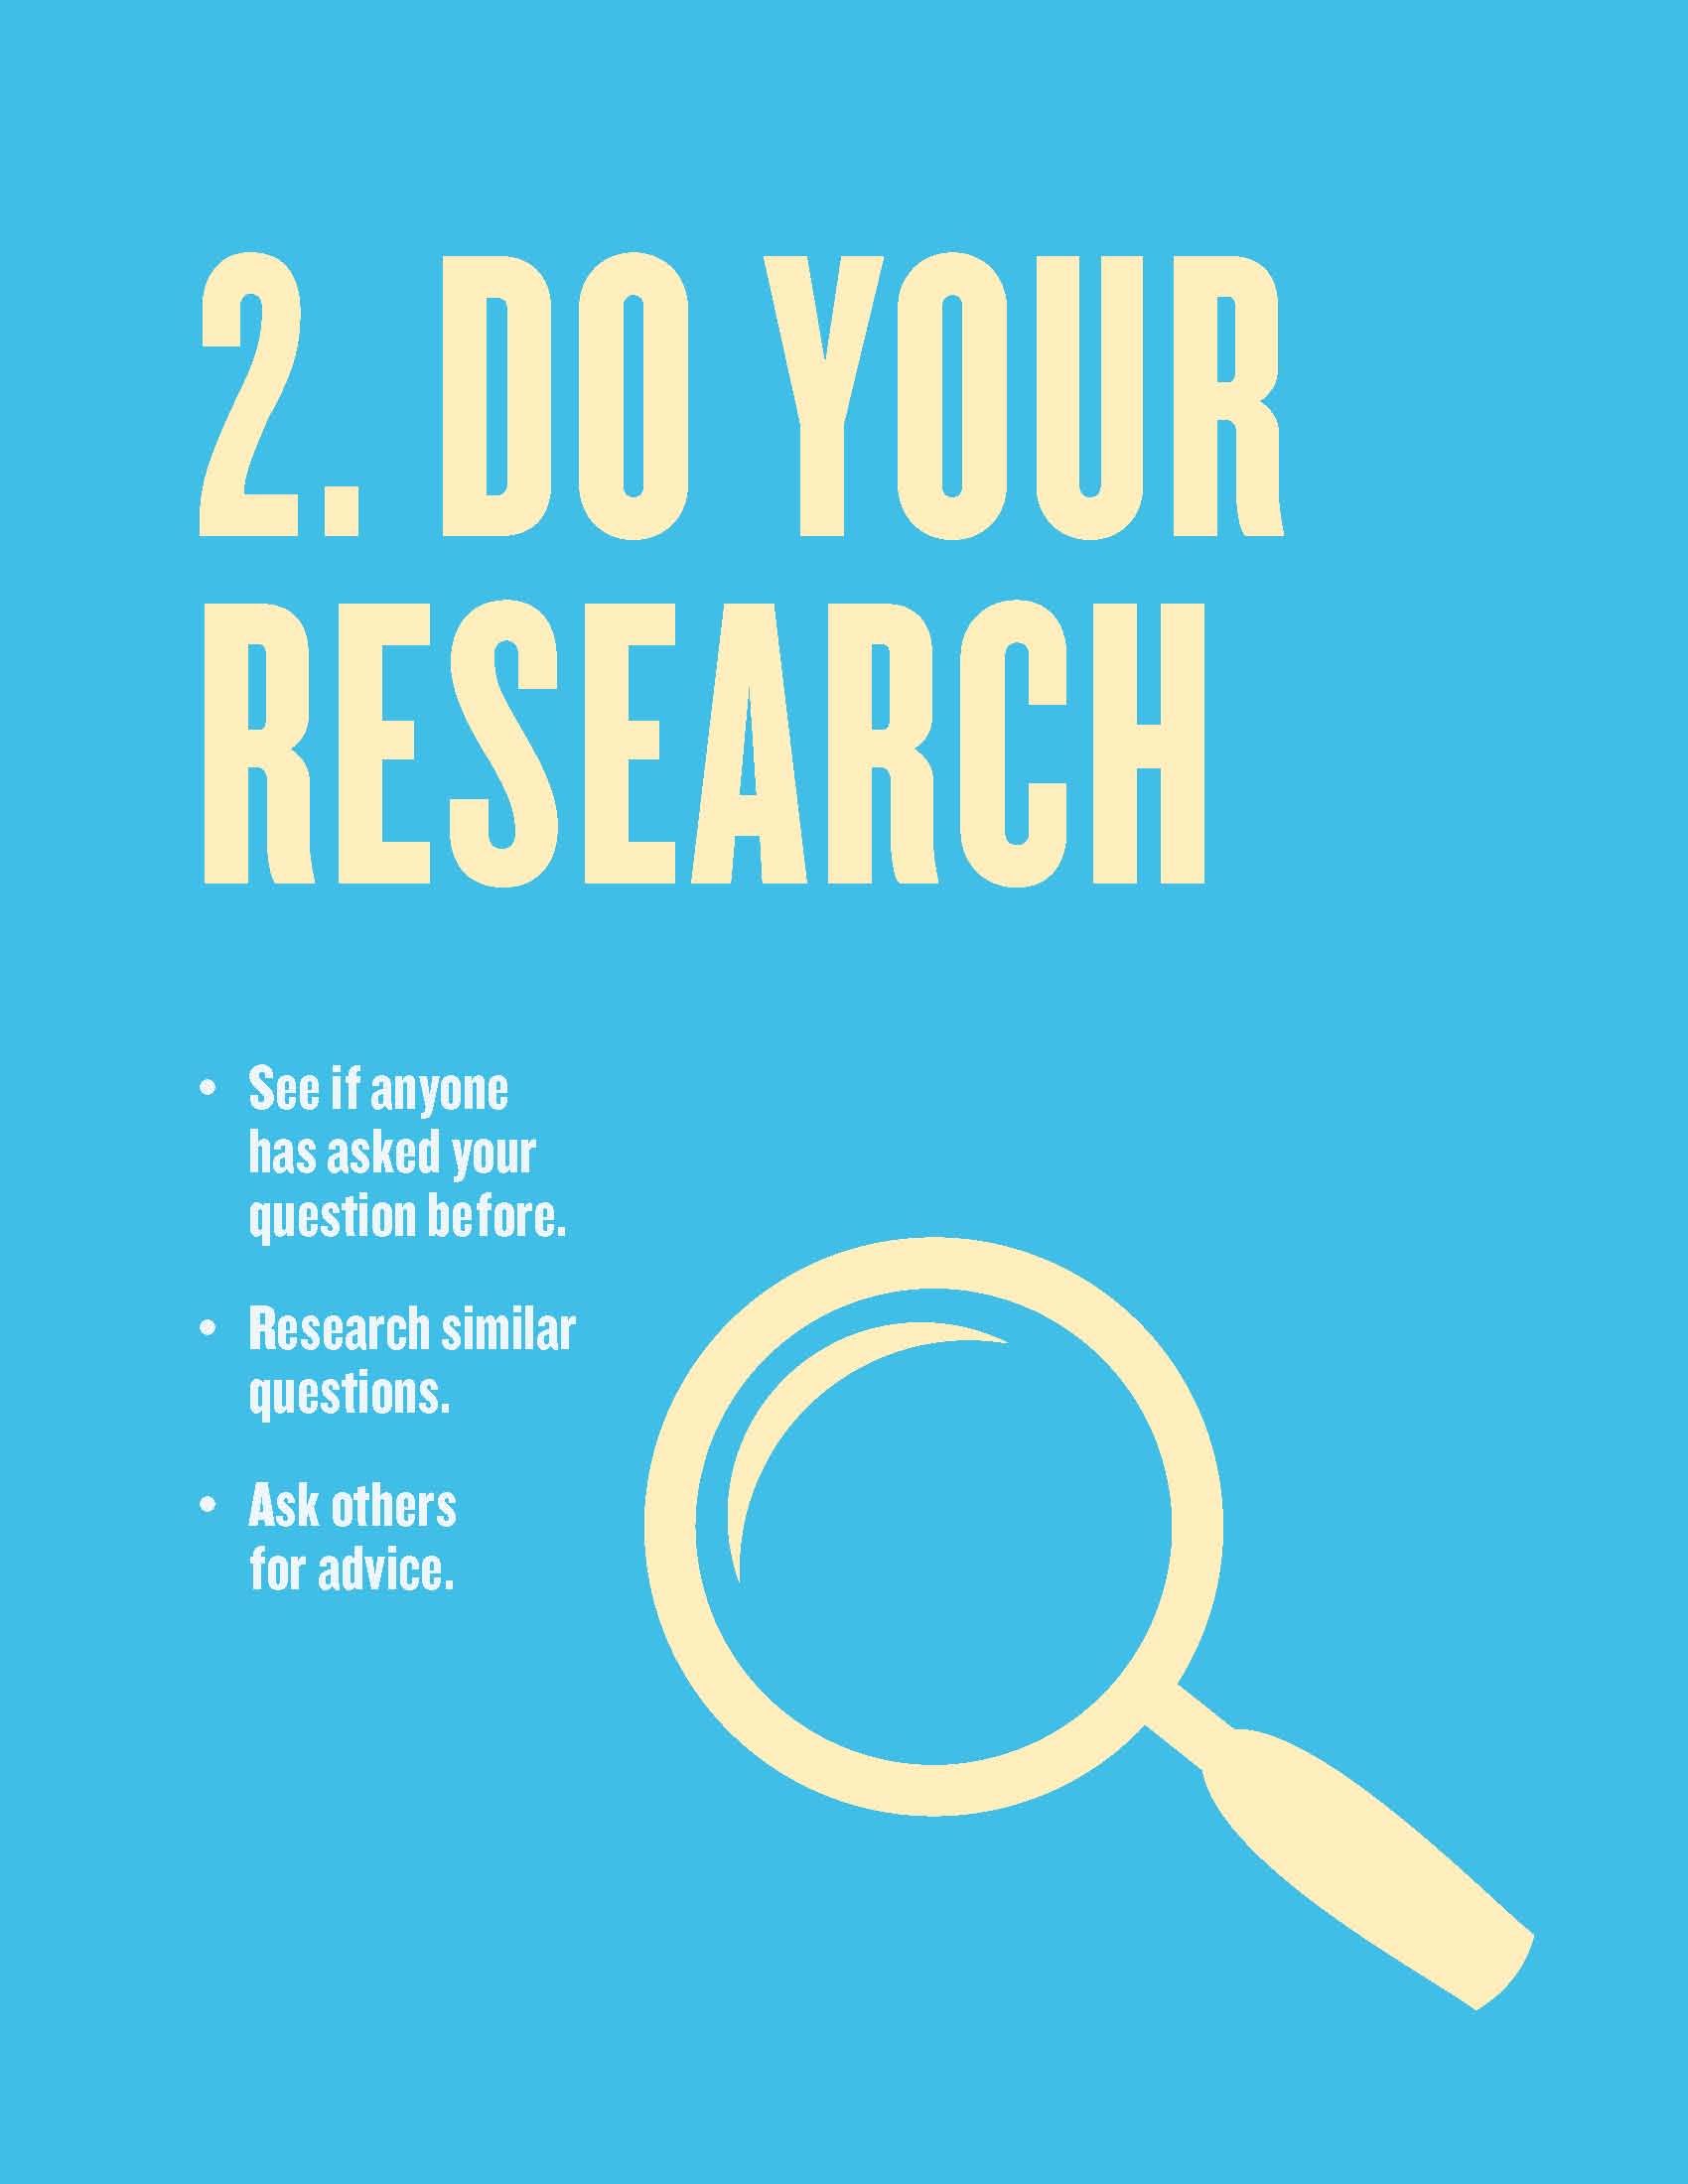 2. Do your research